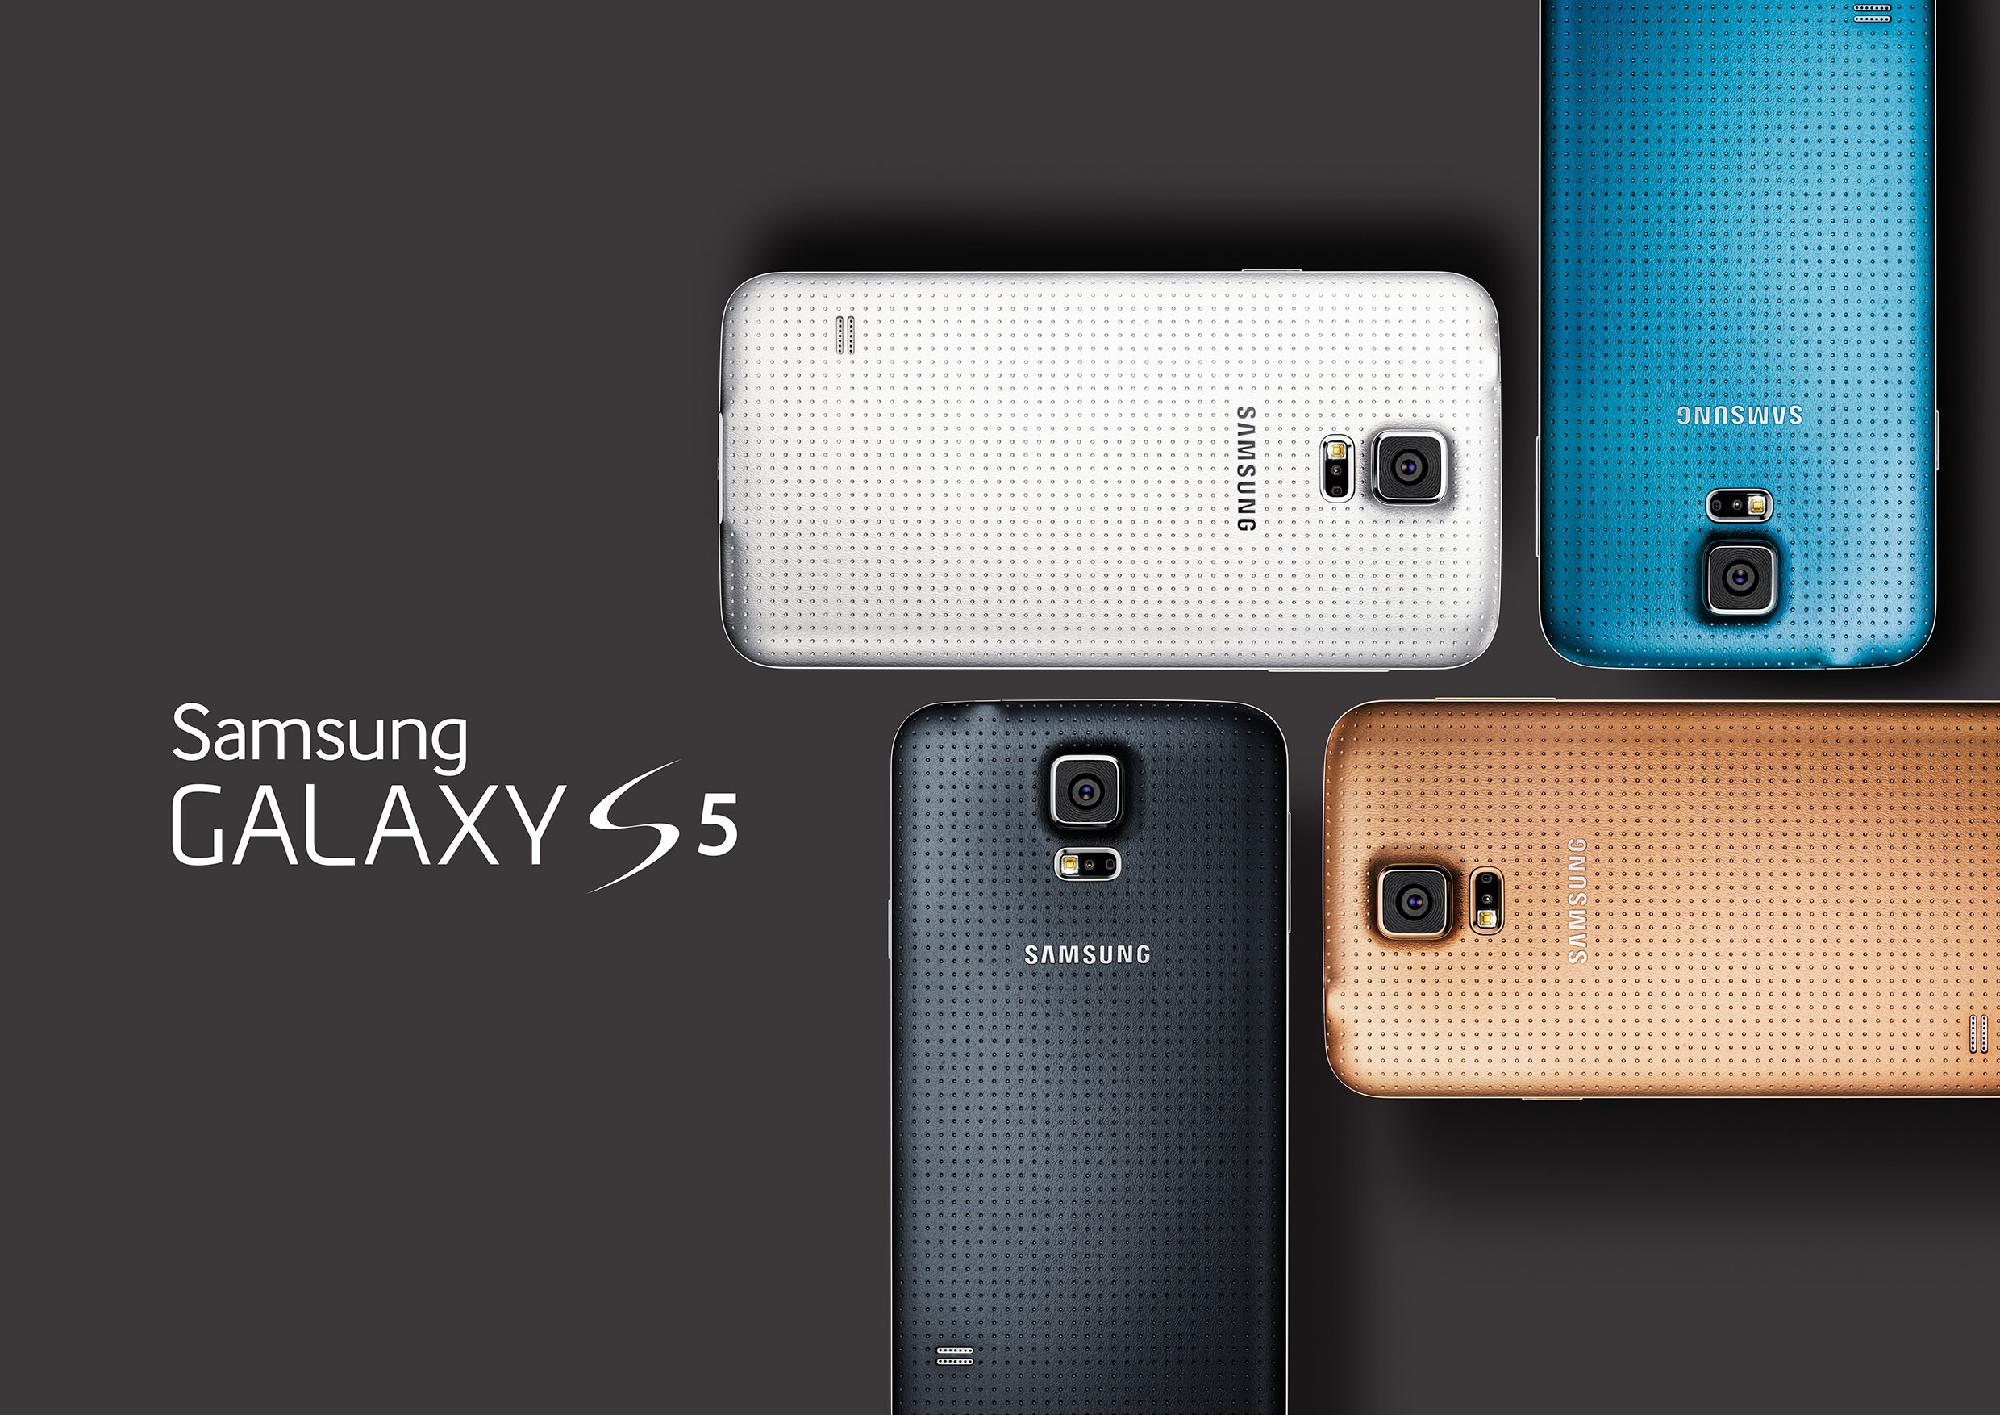 Samsung Galaxy S5 Gets Poster Like Image and Camera App Concept ...